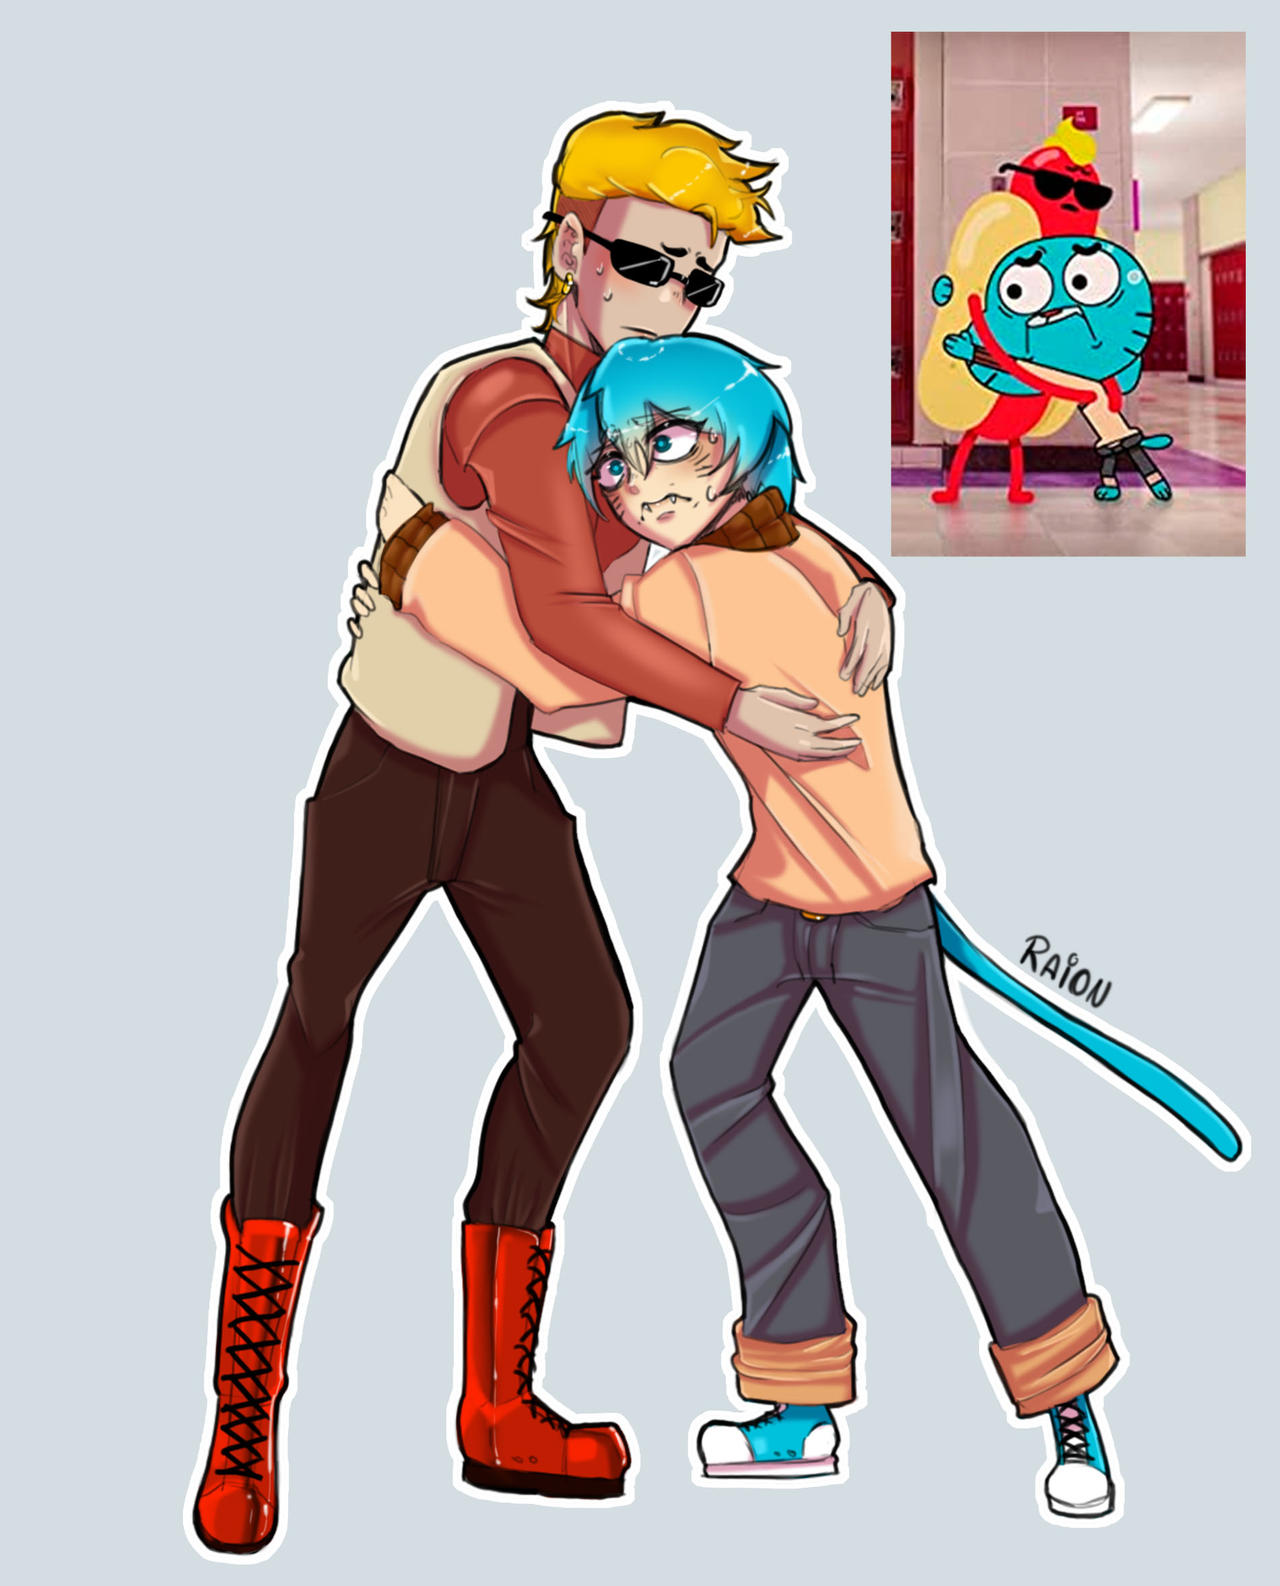 Humanized Darwin and Gumball by @Peargor on twitter : r/gumball